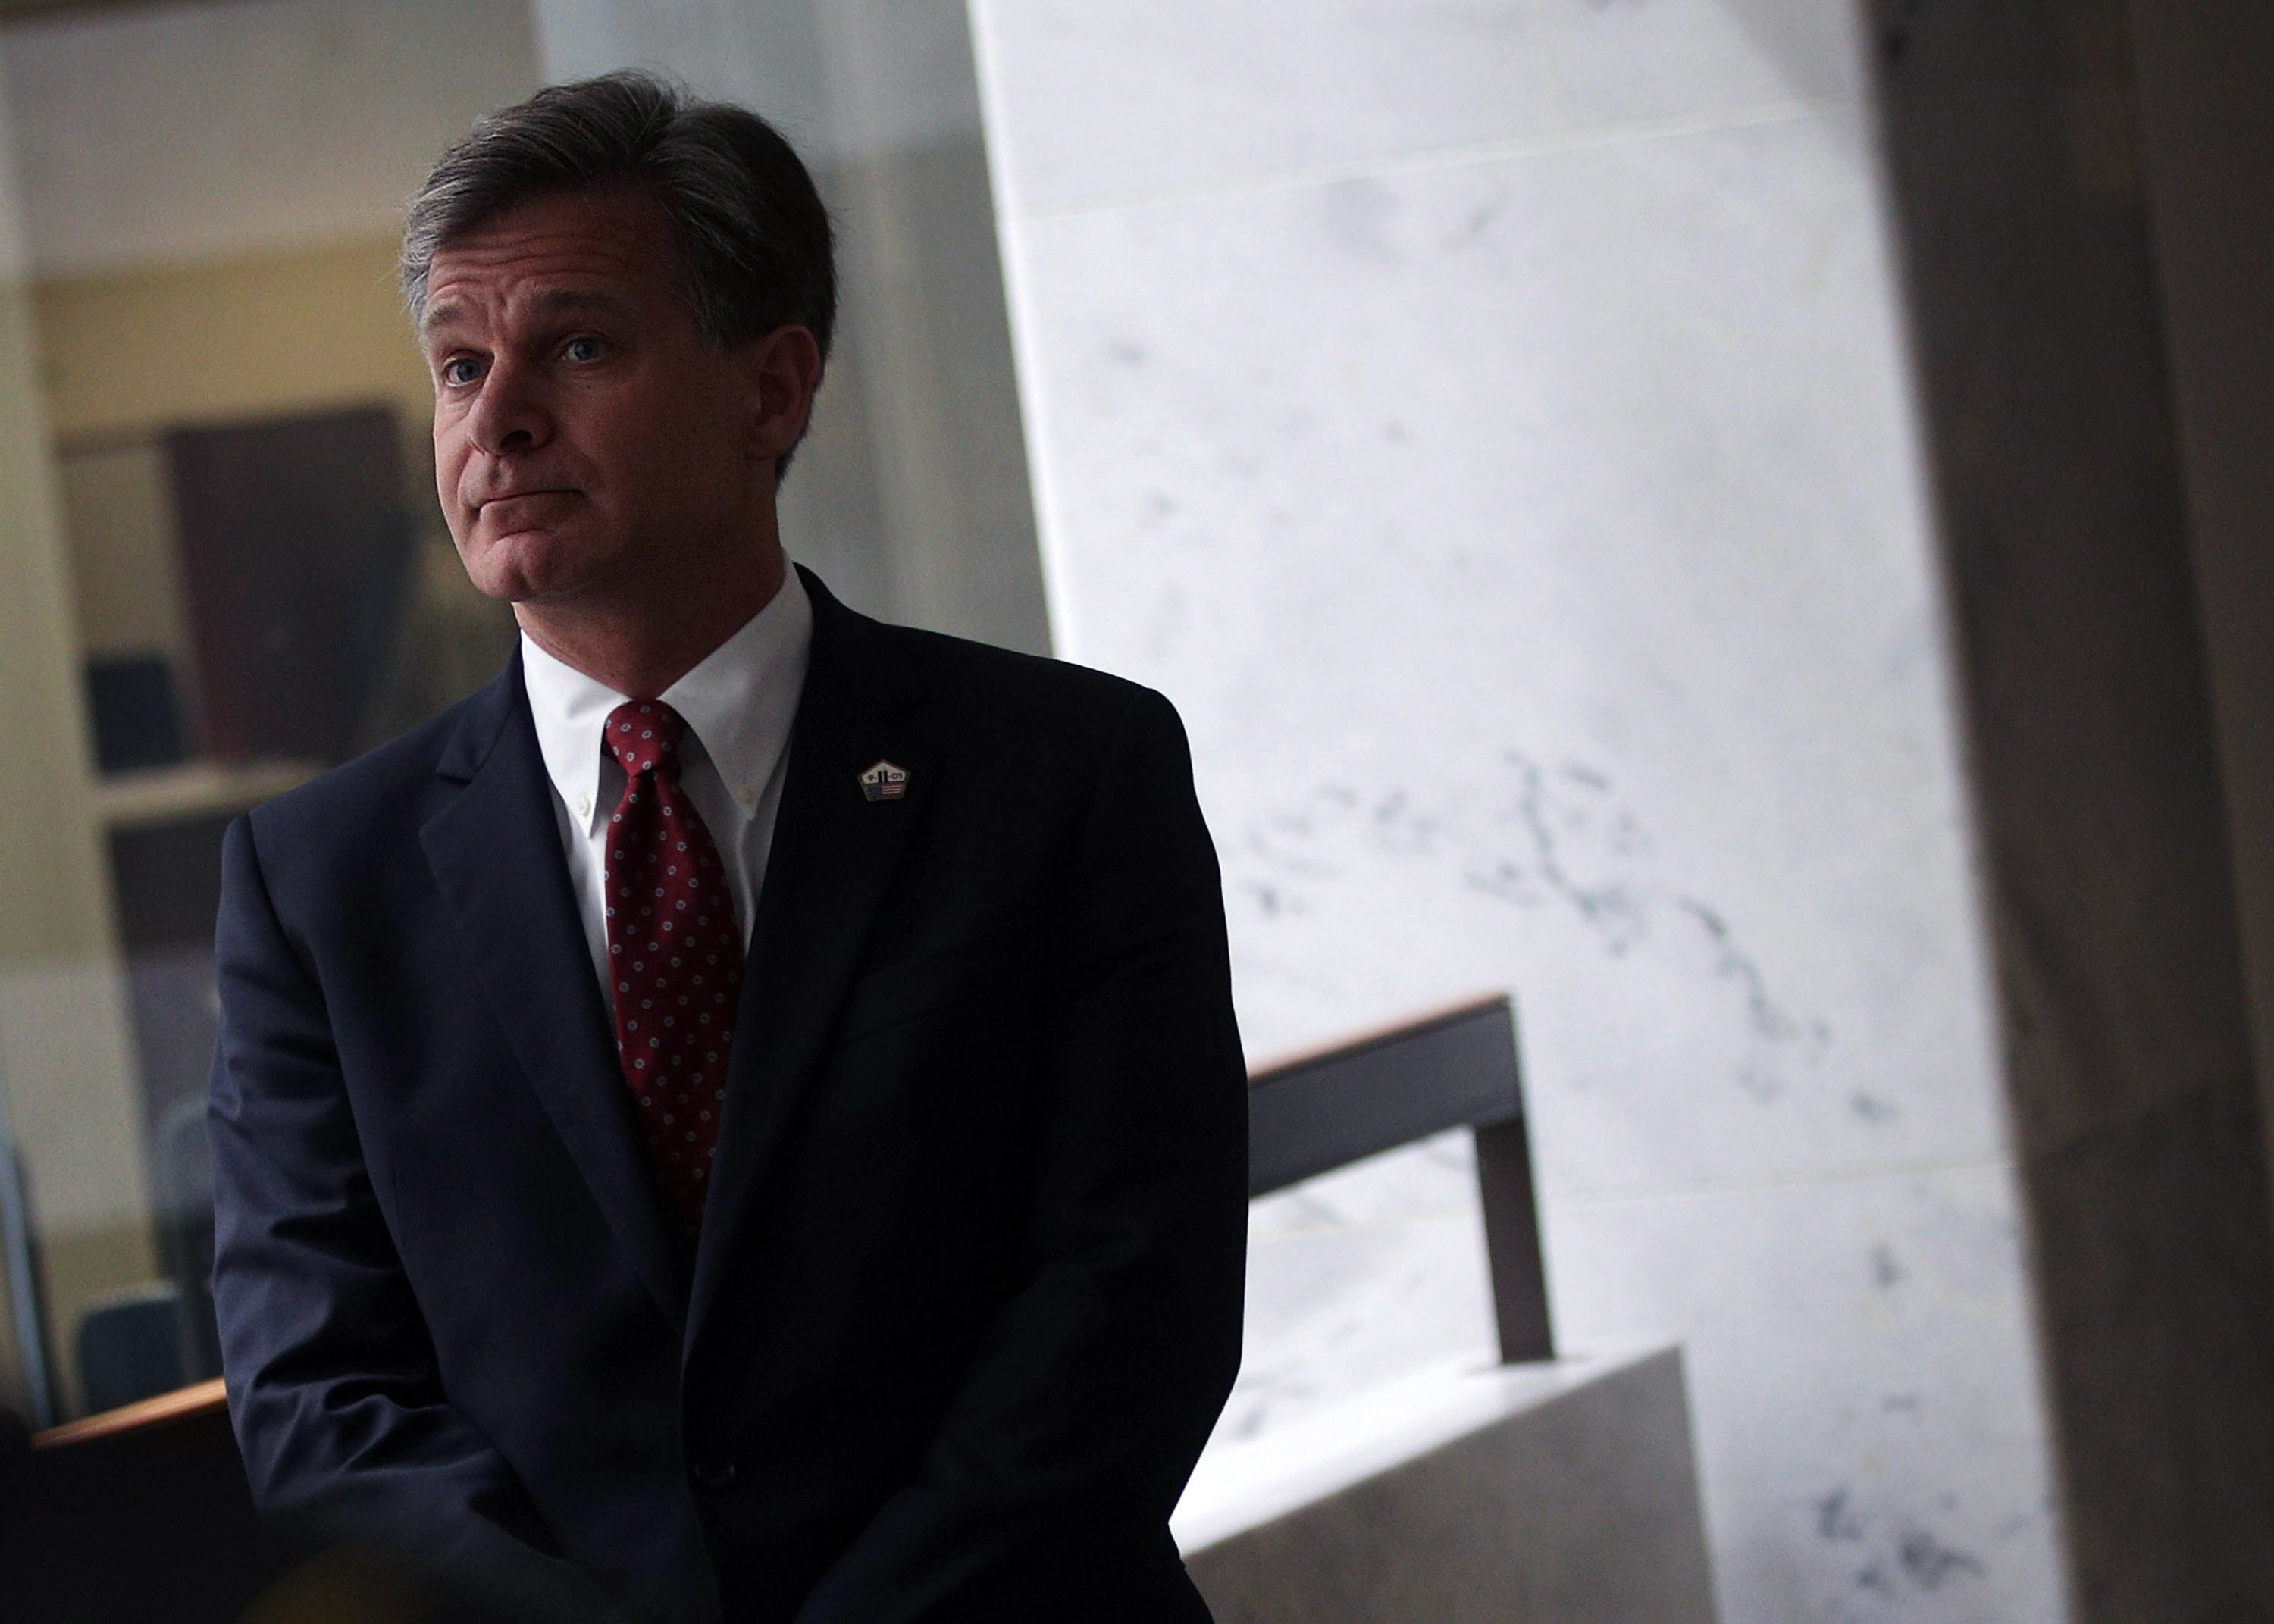 Senate panel votes to confirm Christopher Wray as new FBI director